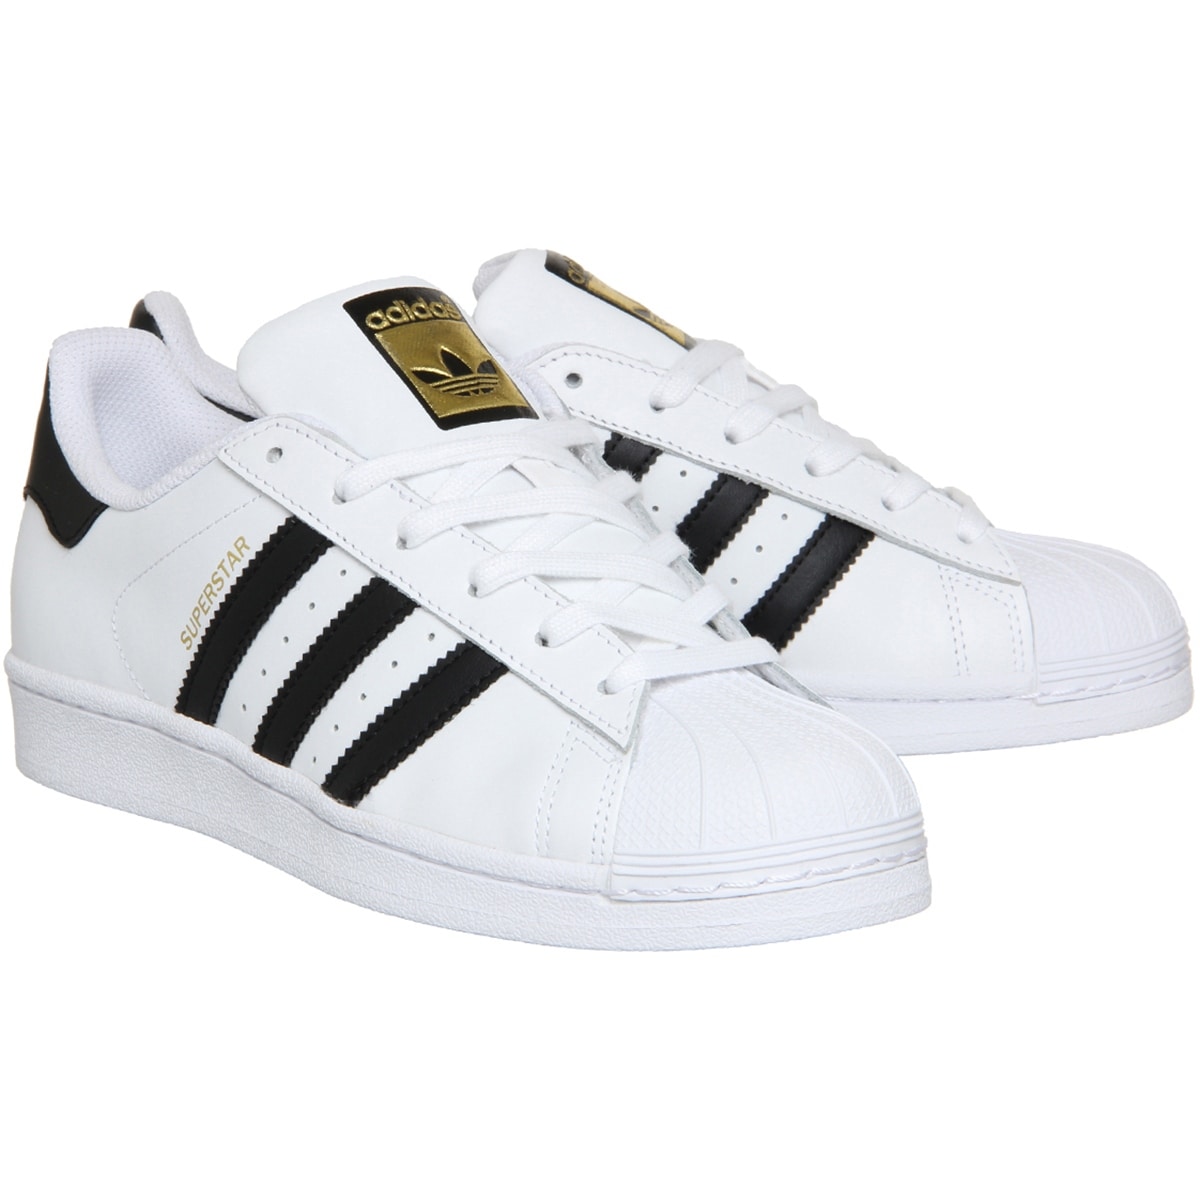 Adidas Superstar Rubber Shell Toe Shoes 